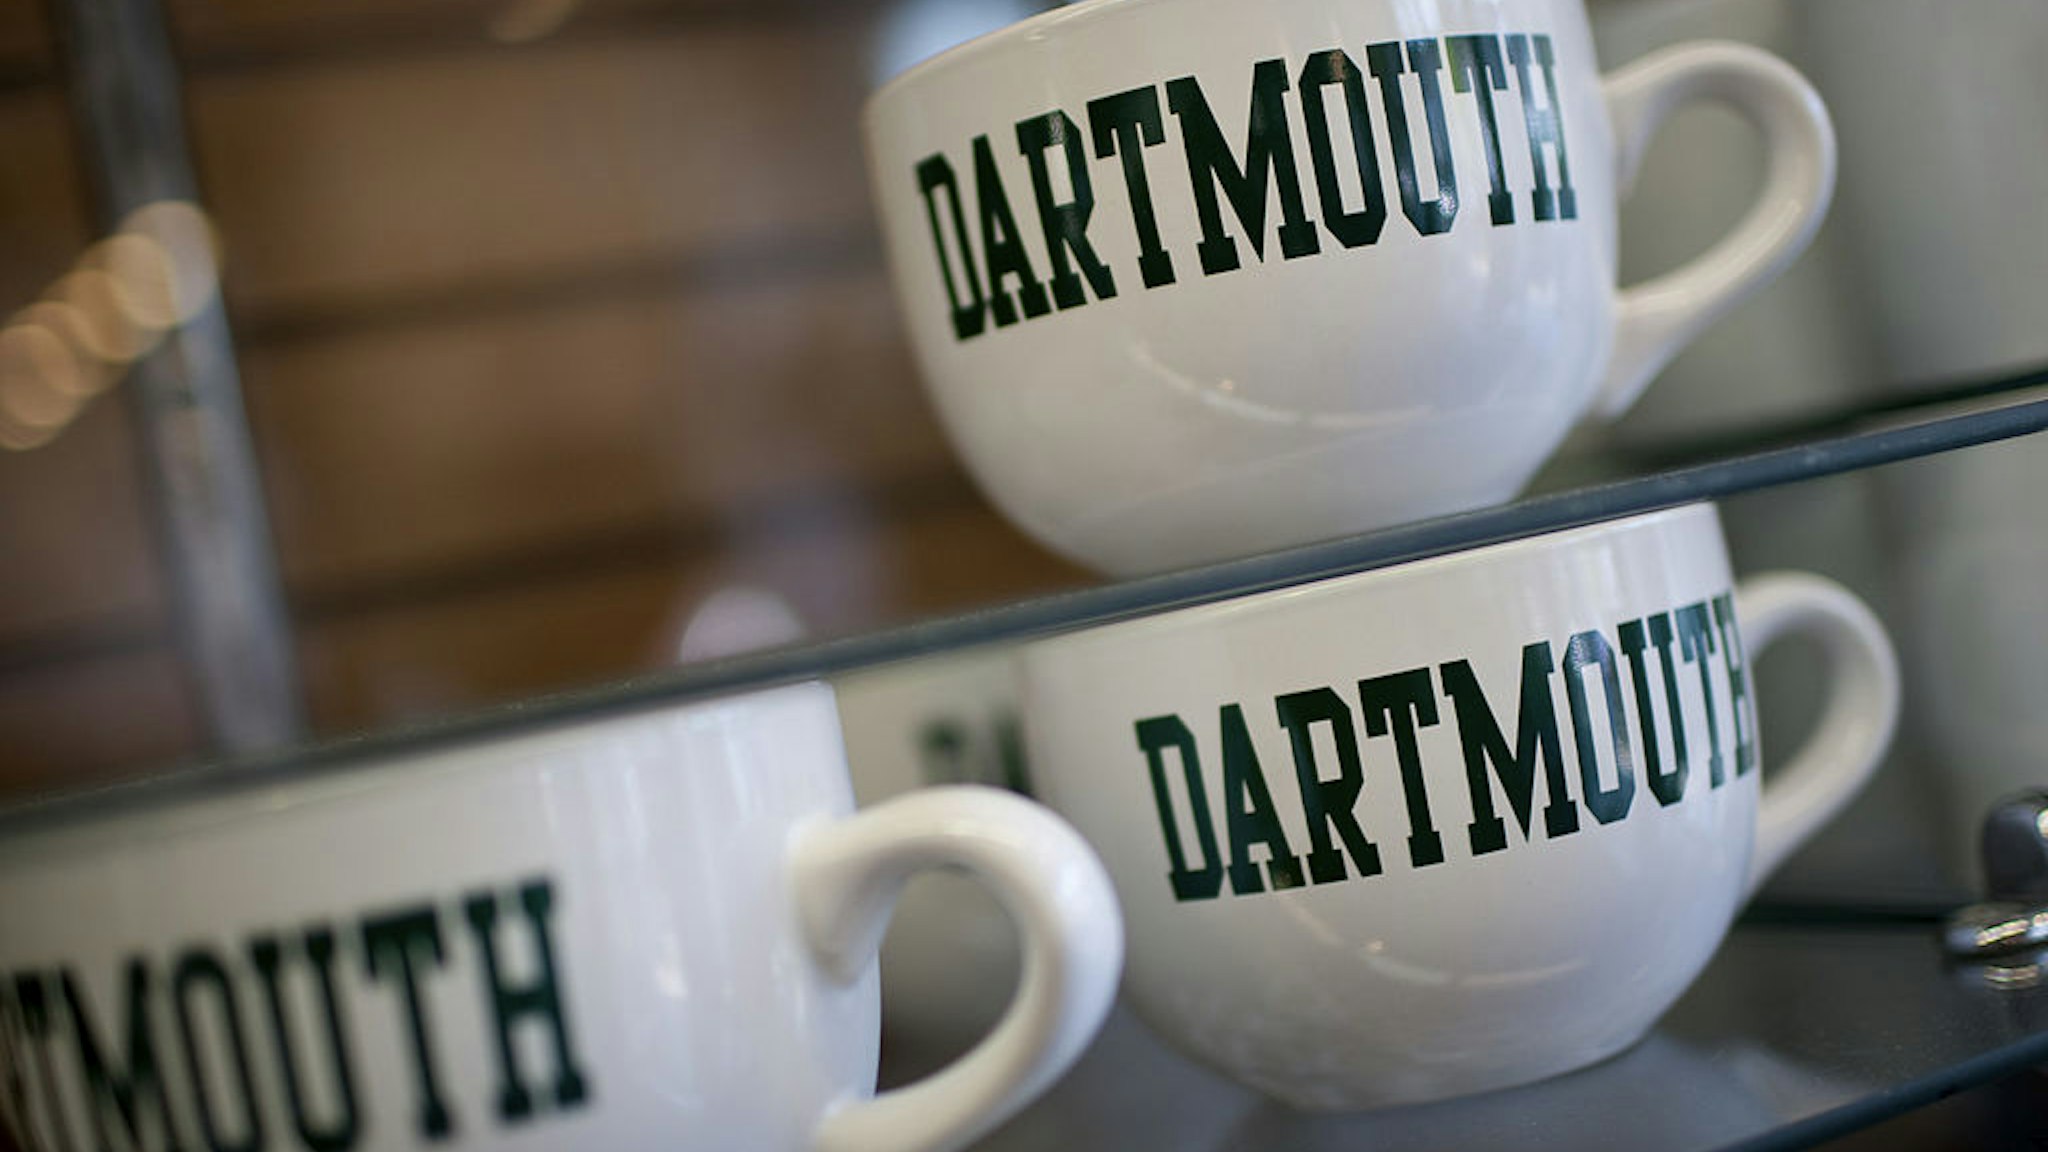 Dartmouth College mugs are displayed for sale at a store on campus the day before a Republican presidential debate sponsored by Bloomberg via Getty Images and The Washington Post held at Dartmouth College in Hanover, New Hampshire, U.S., on Monday, Oct. 10, 2011.